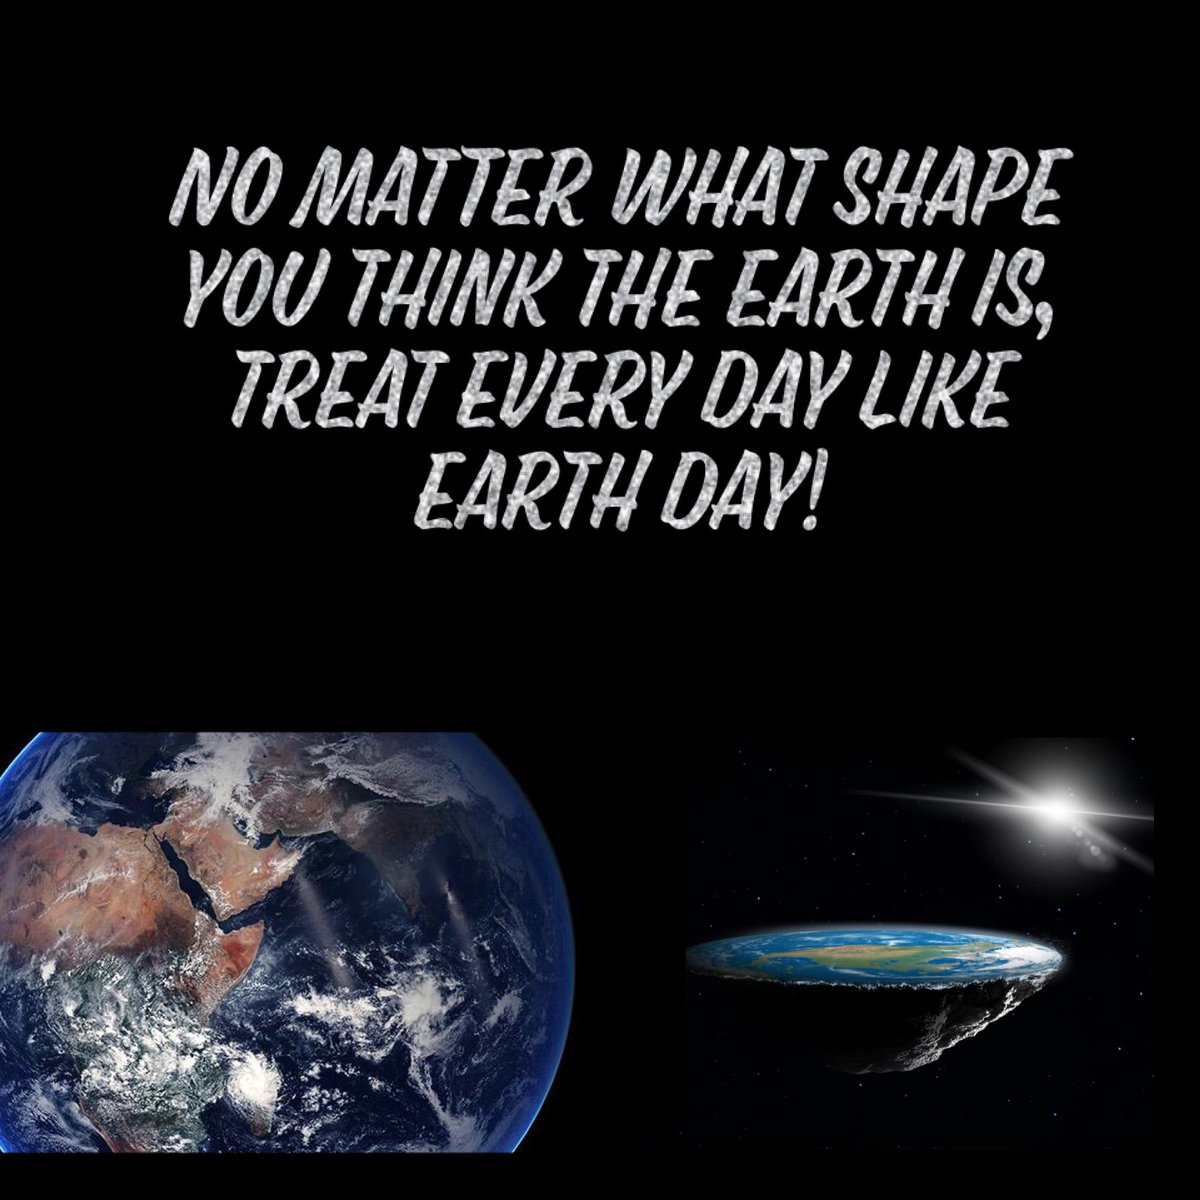 Shape and size might matter with some things, but not when it comes to taking care of our earth. Happy #EarthDay! 
#loveourearth🌍 #Empath #Nature #Earth #FlatEarth #RoundEarth #GroundingEnergy